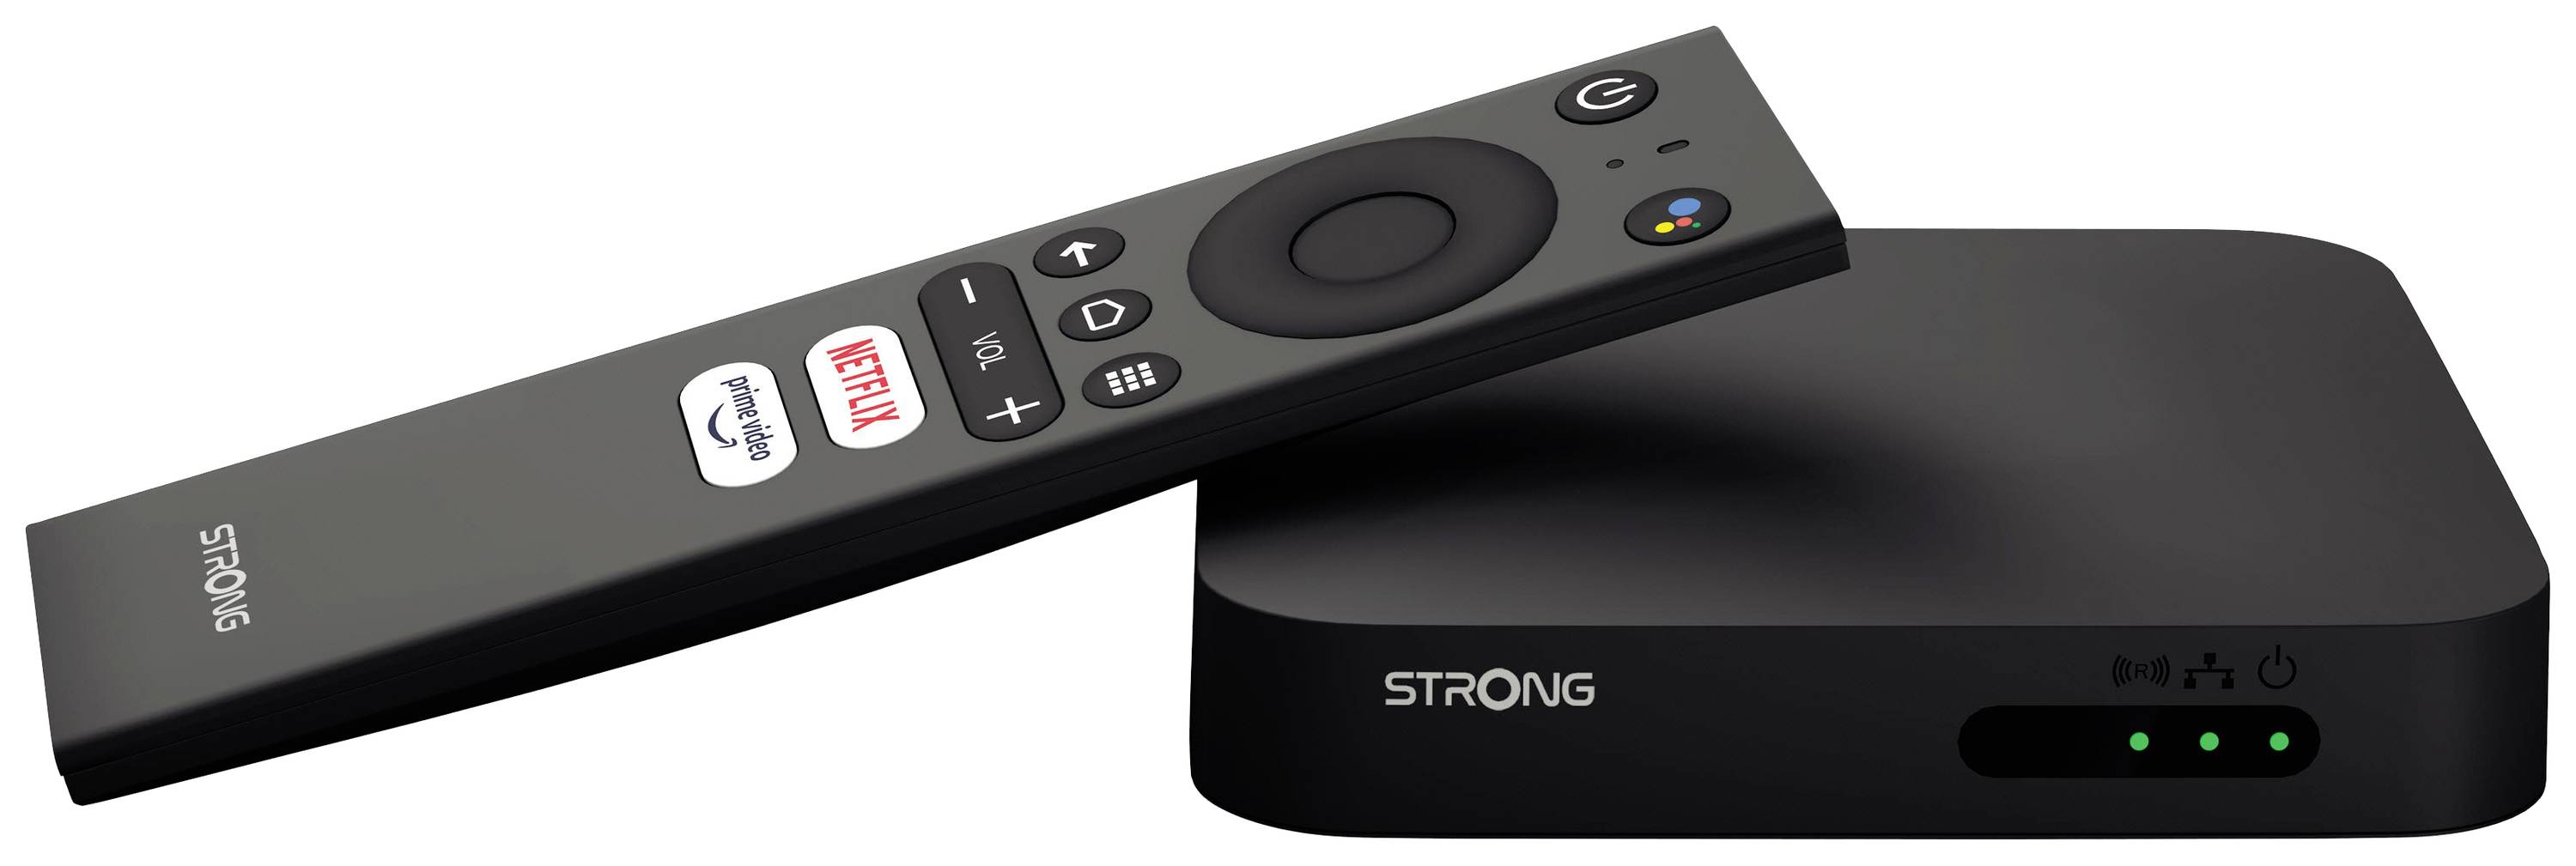 | box 4K, Strong Streaming HDR, compatibility Buy Conrad Network LEAP-S3 Electronic